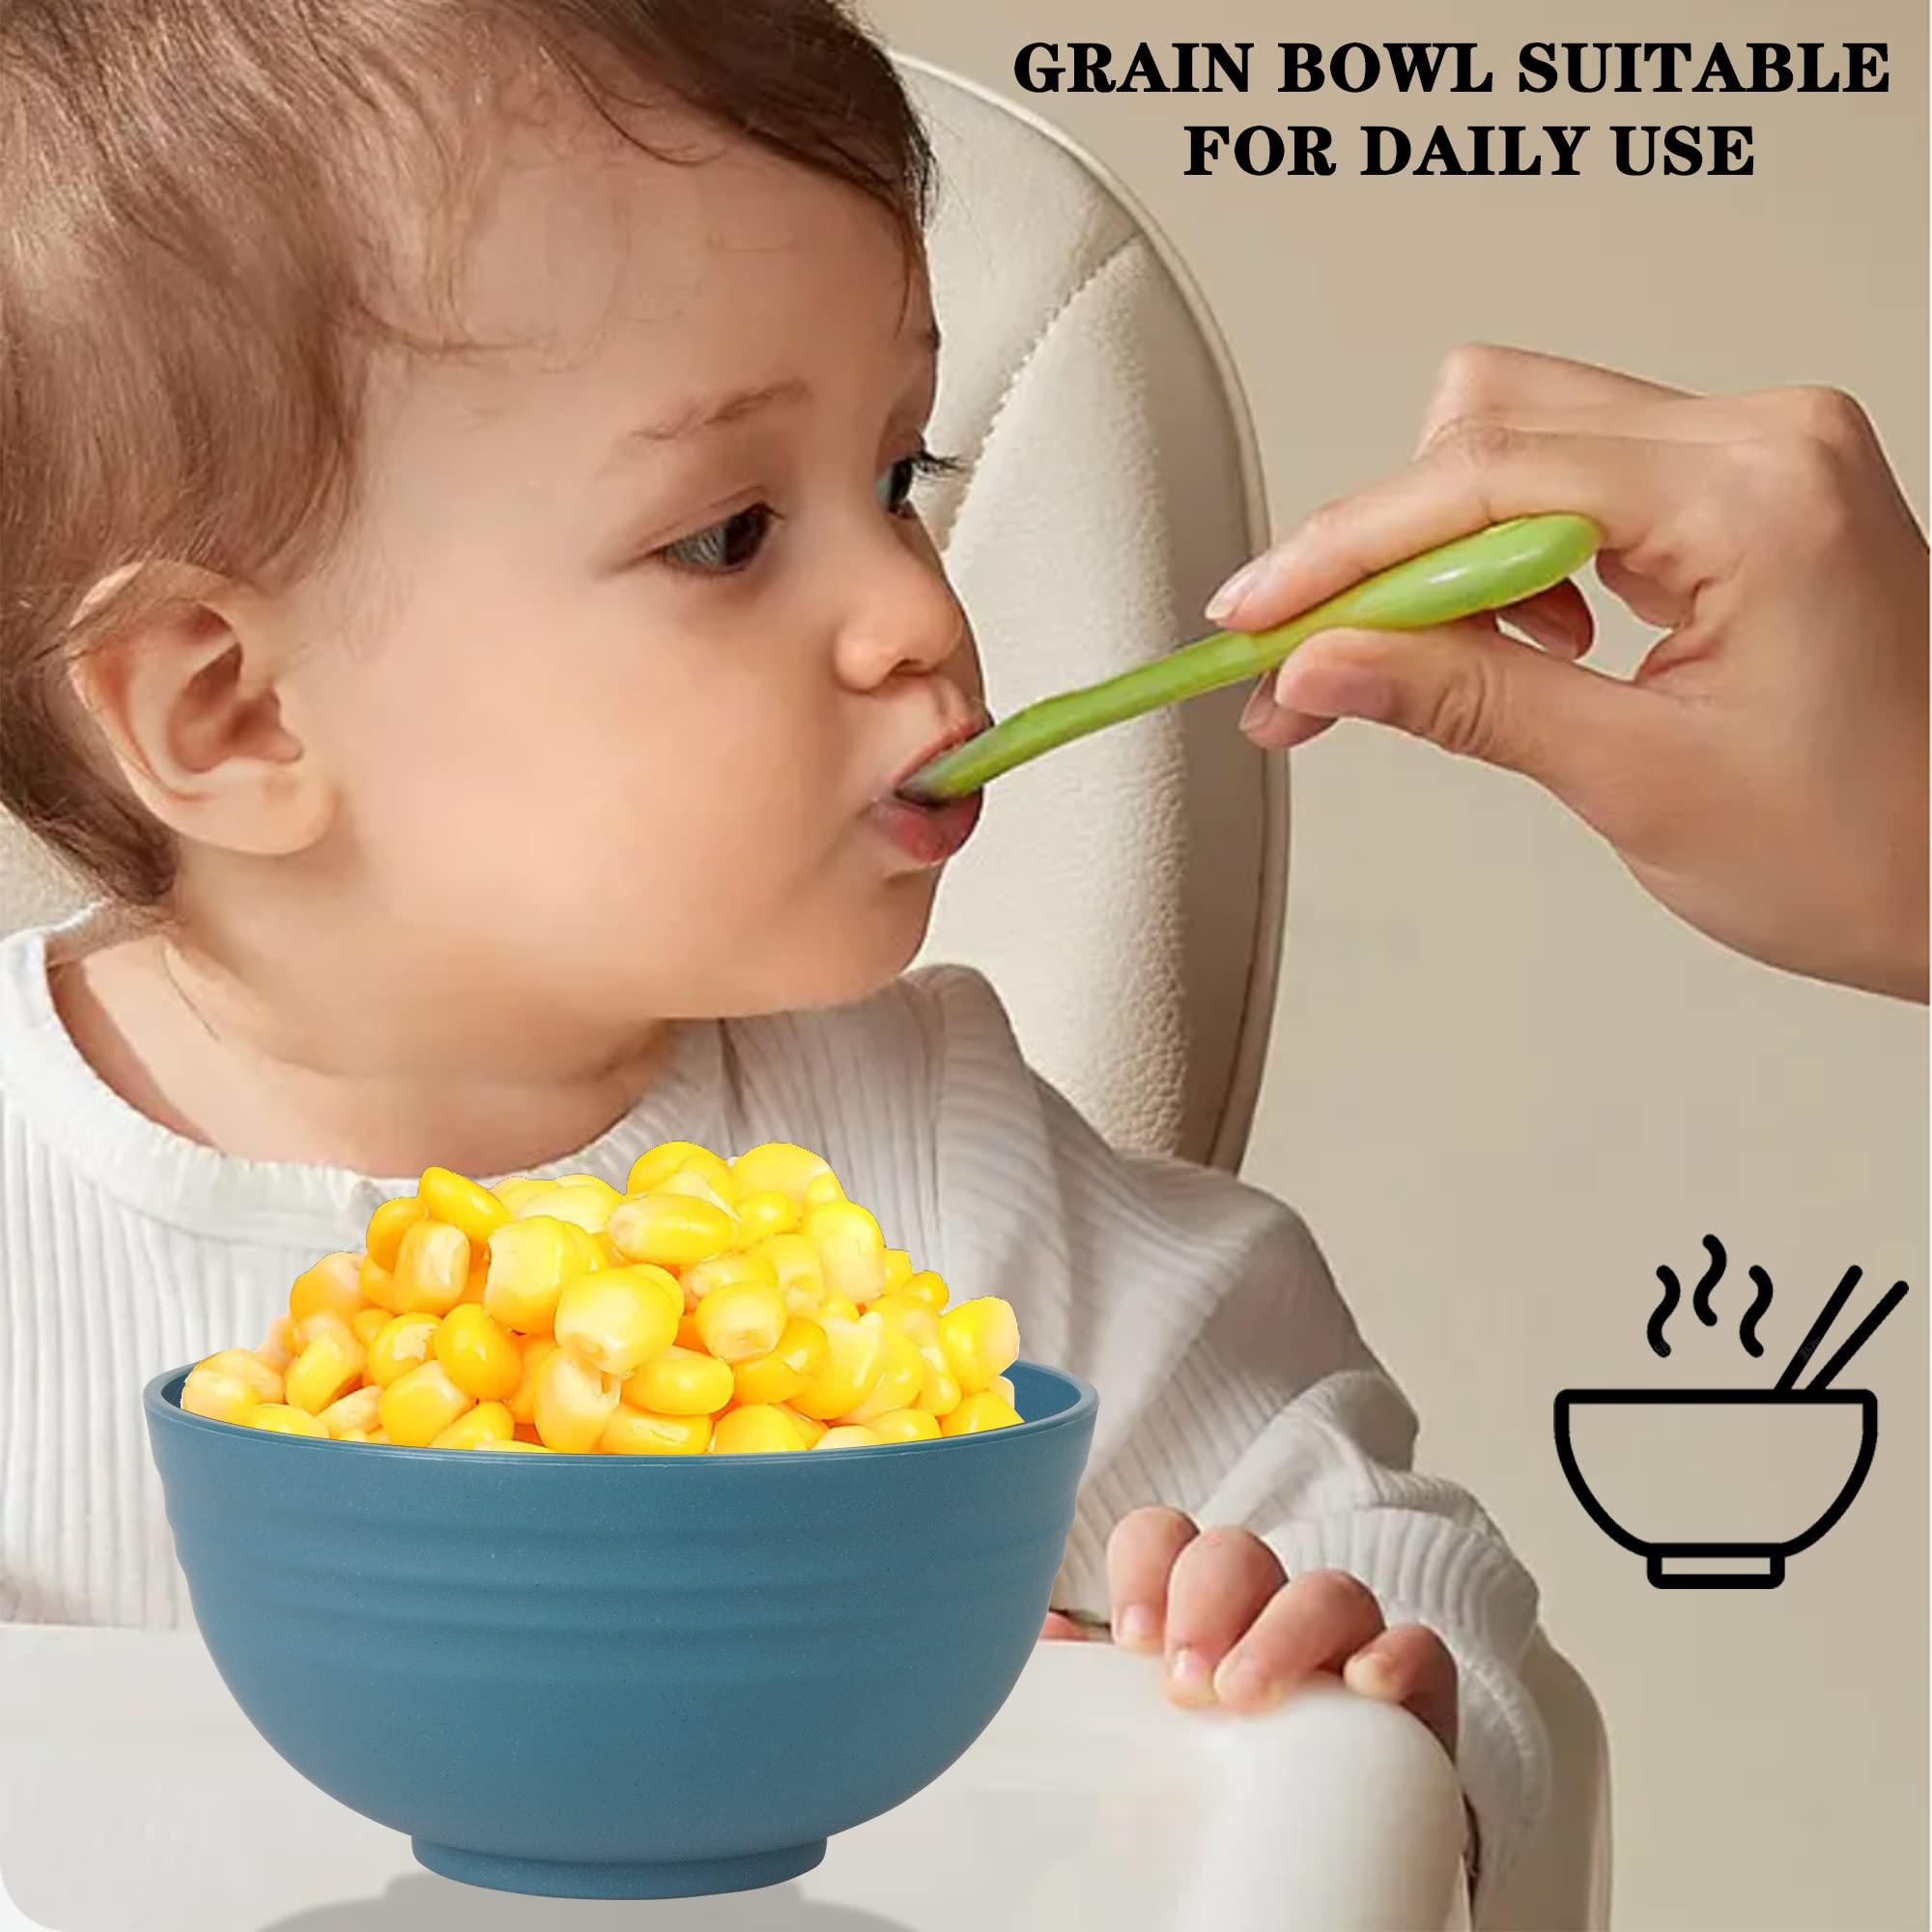 Unbreakable Cereal Bowl 24 Oz - Wheat Straw Fiber Bowl - Salad Bowl - Dessert Bowl - Deep Soup Bowl - Set Of 6 - Microwave And Dishwasher Safe, Bpa Free, Suitable For Children And Adults